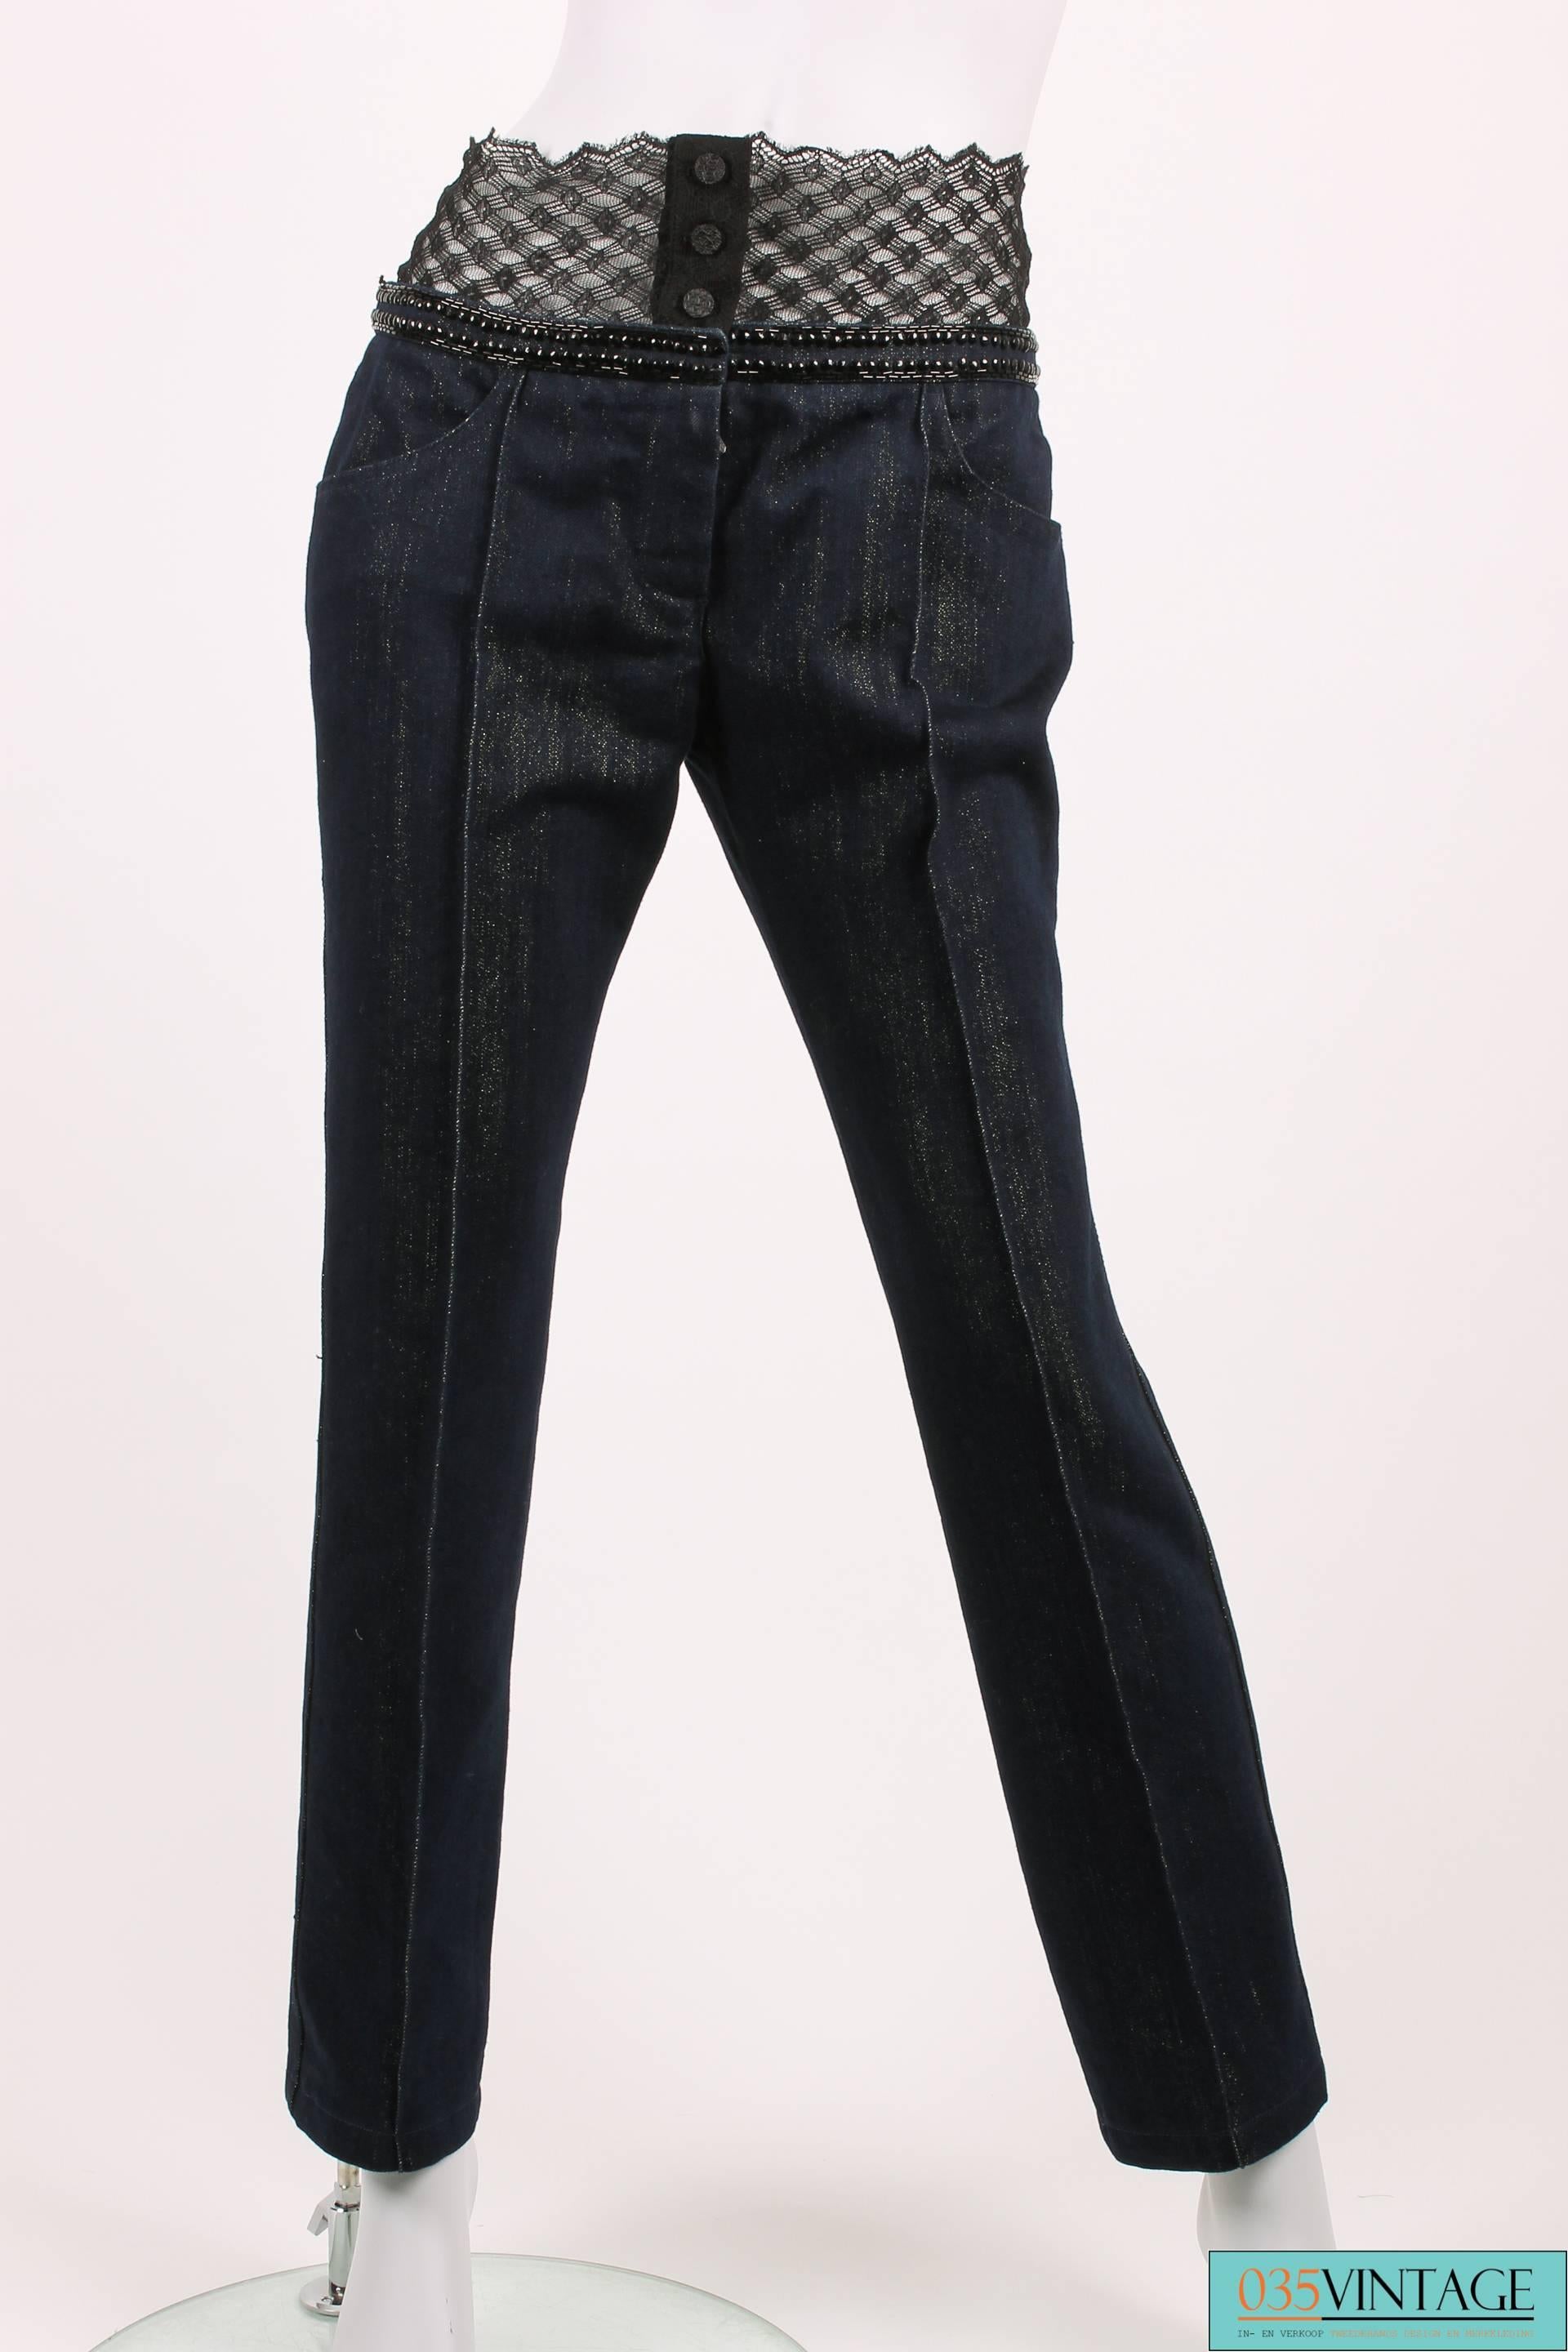 Chanel jeans with a twist from the Runway Collection of 2004!

This pair of jeans is sophisticated and should rather be called 'a pair of denim pants'. It is straight cut and has a seam in the middle of the leg. The dark blue jeans fabric has a